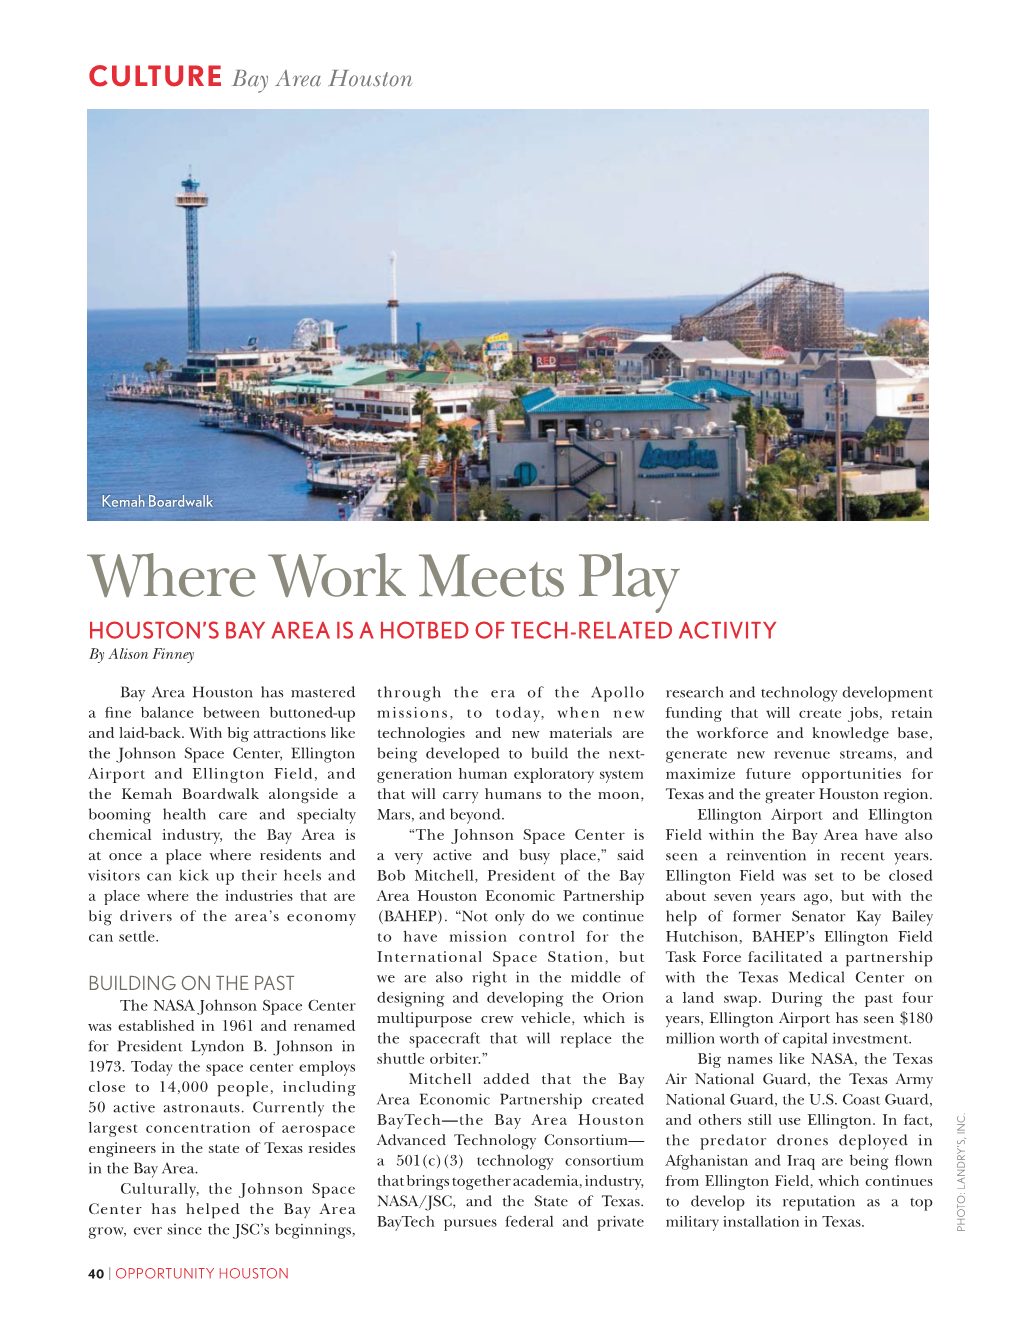 Where Work Meets Play HOUSTON’S BAY AREA IS a HOTBED of TECH-RELATED ACTIVITY by Alison Finney